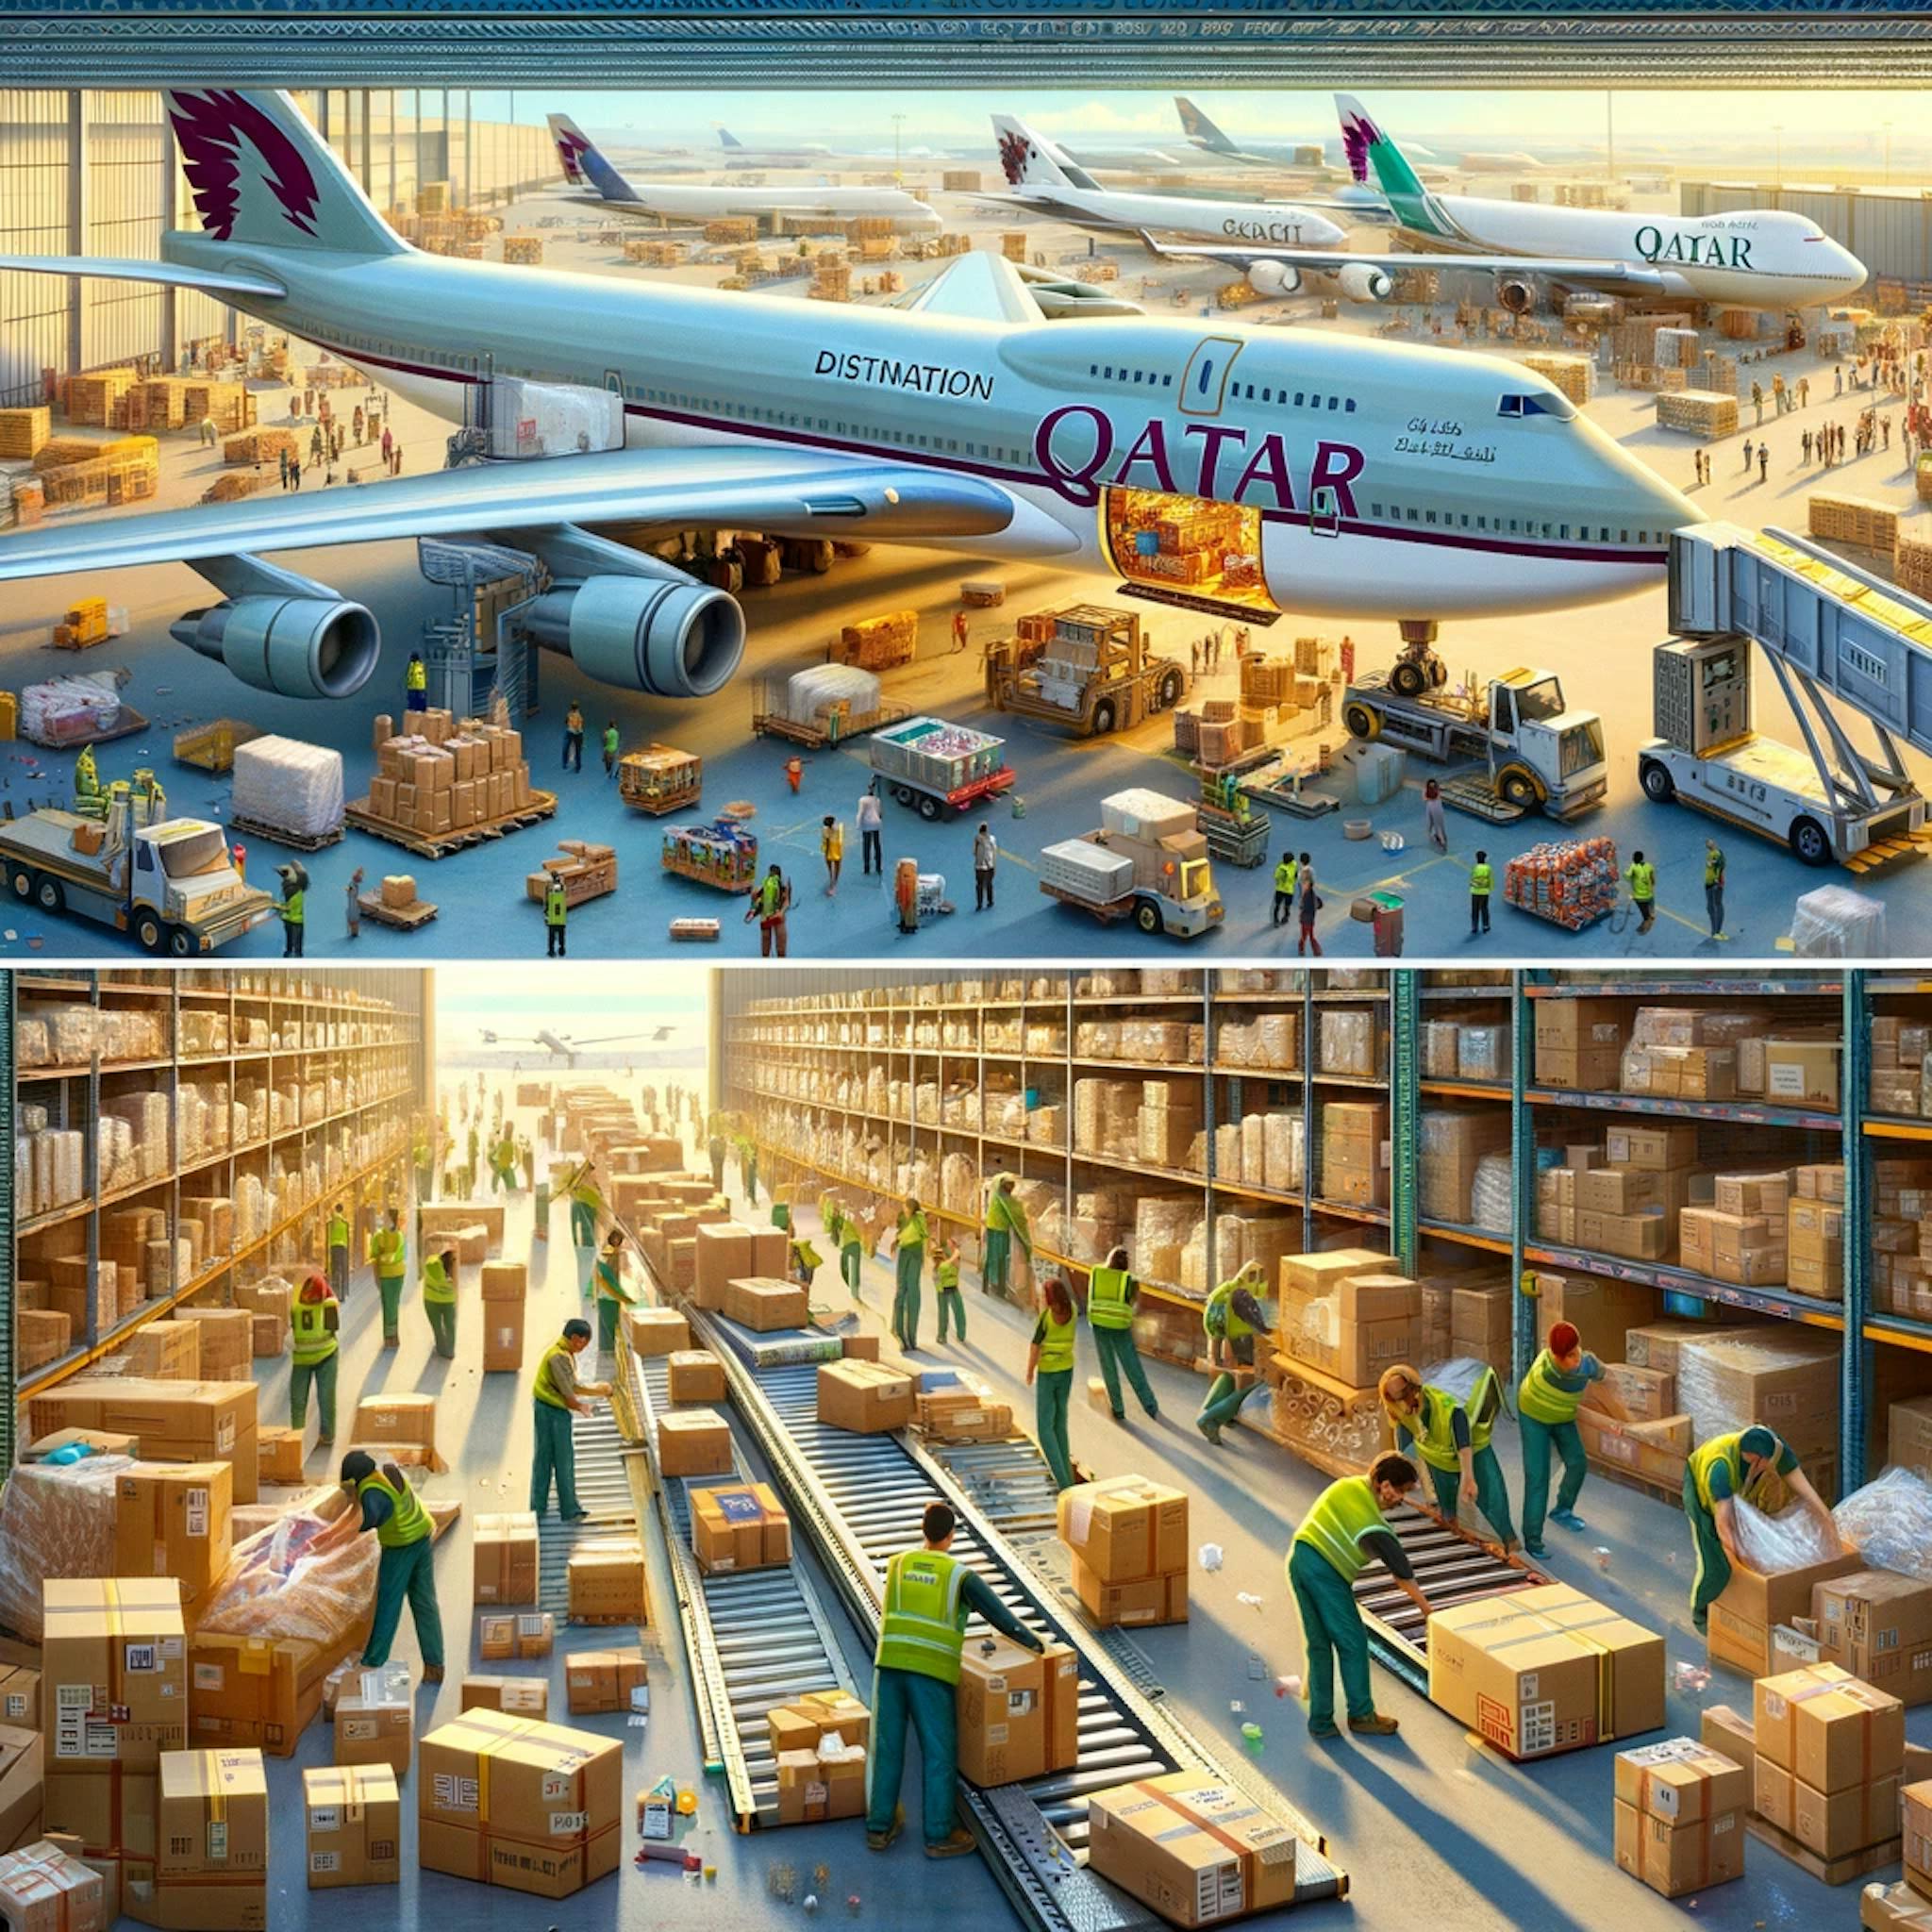 inside of a busy warehouse with workers packing items into a box labeled for Qatar